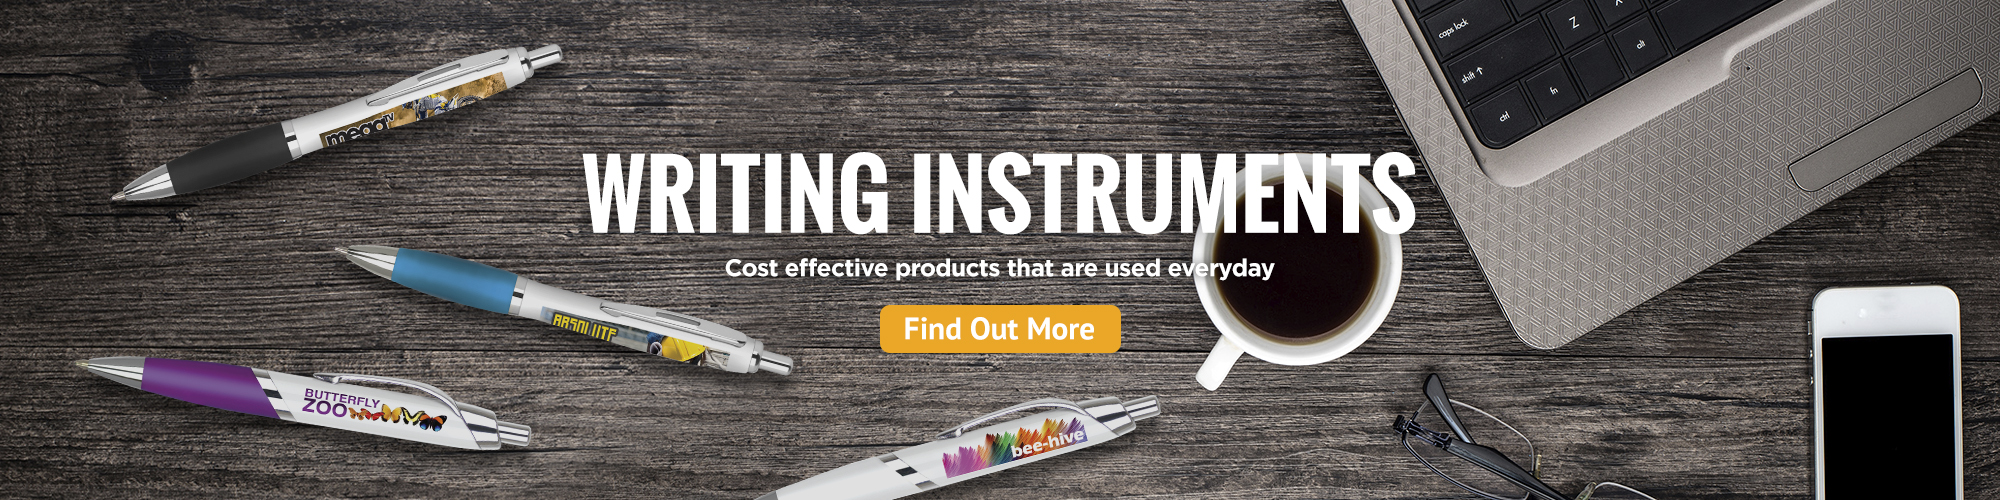 writing_instruments